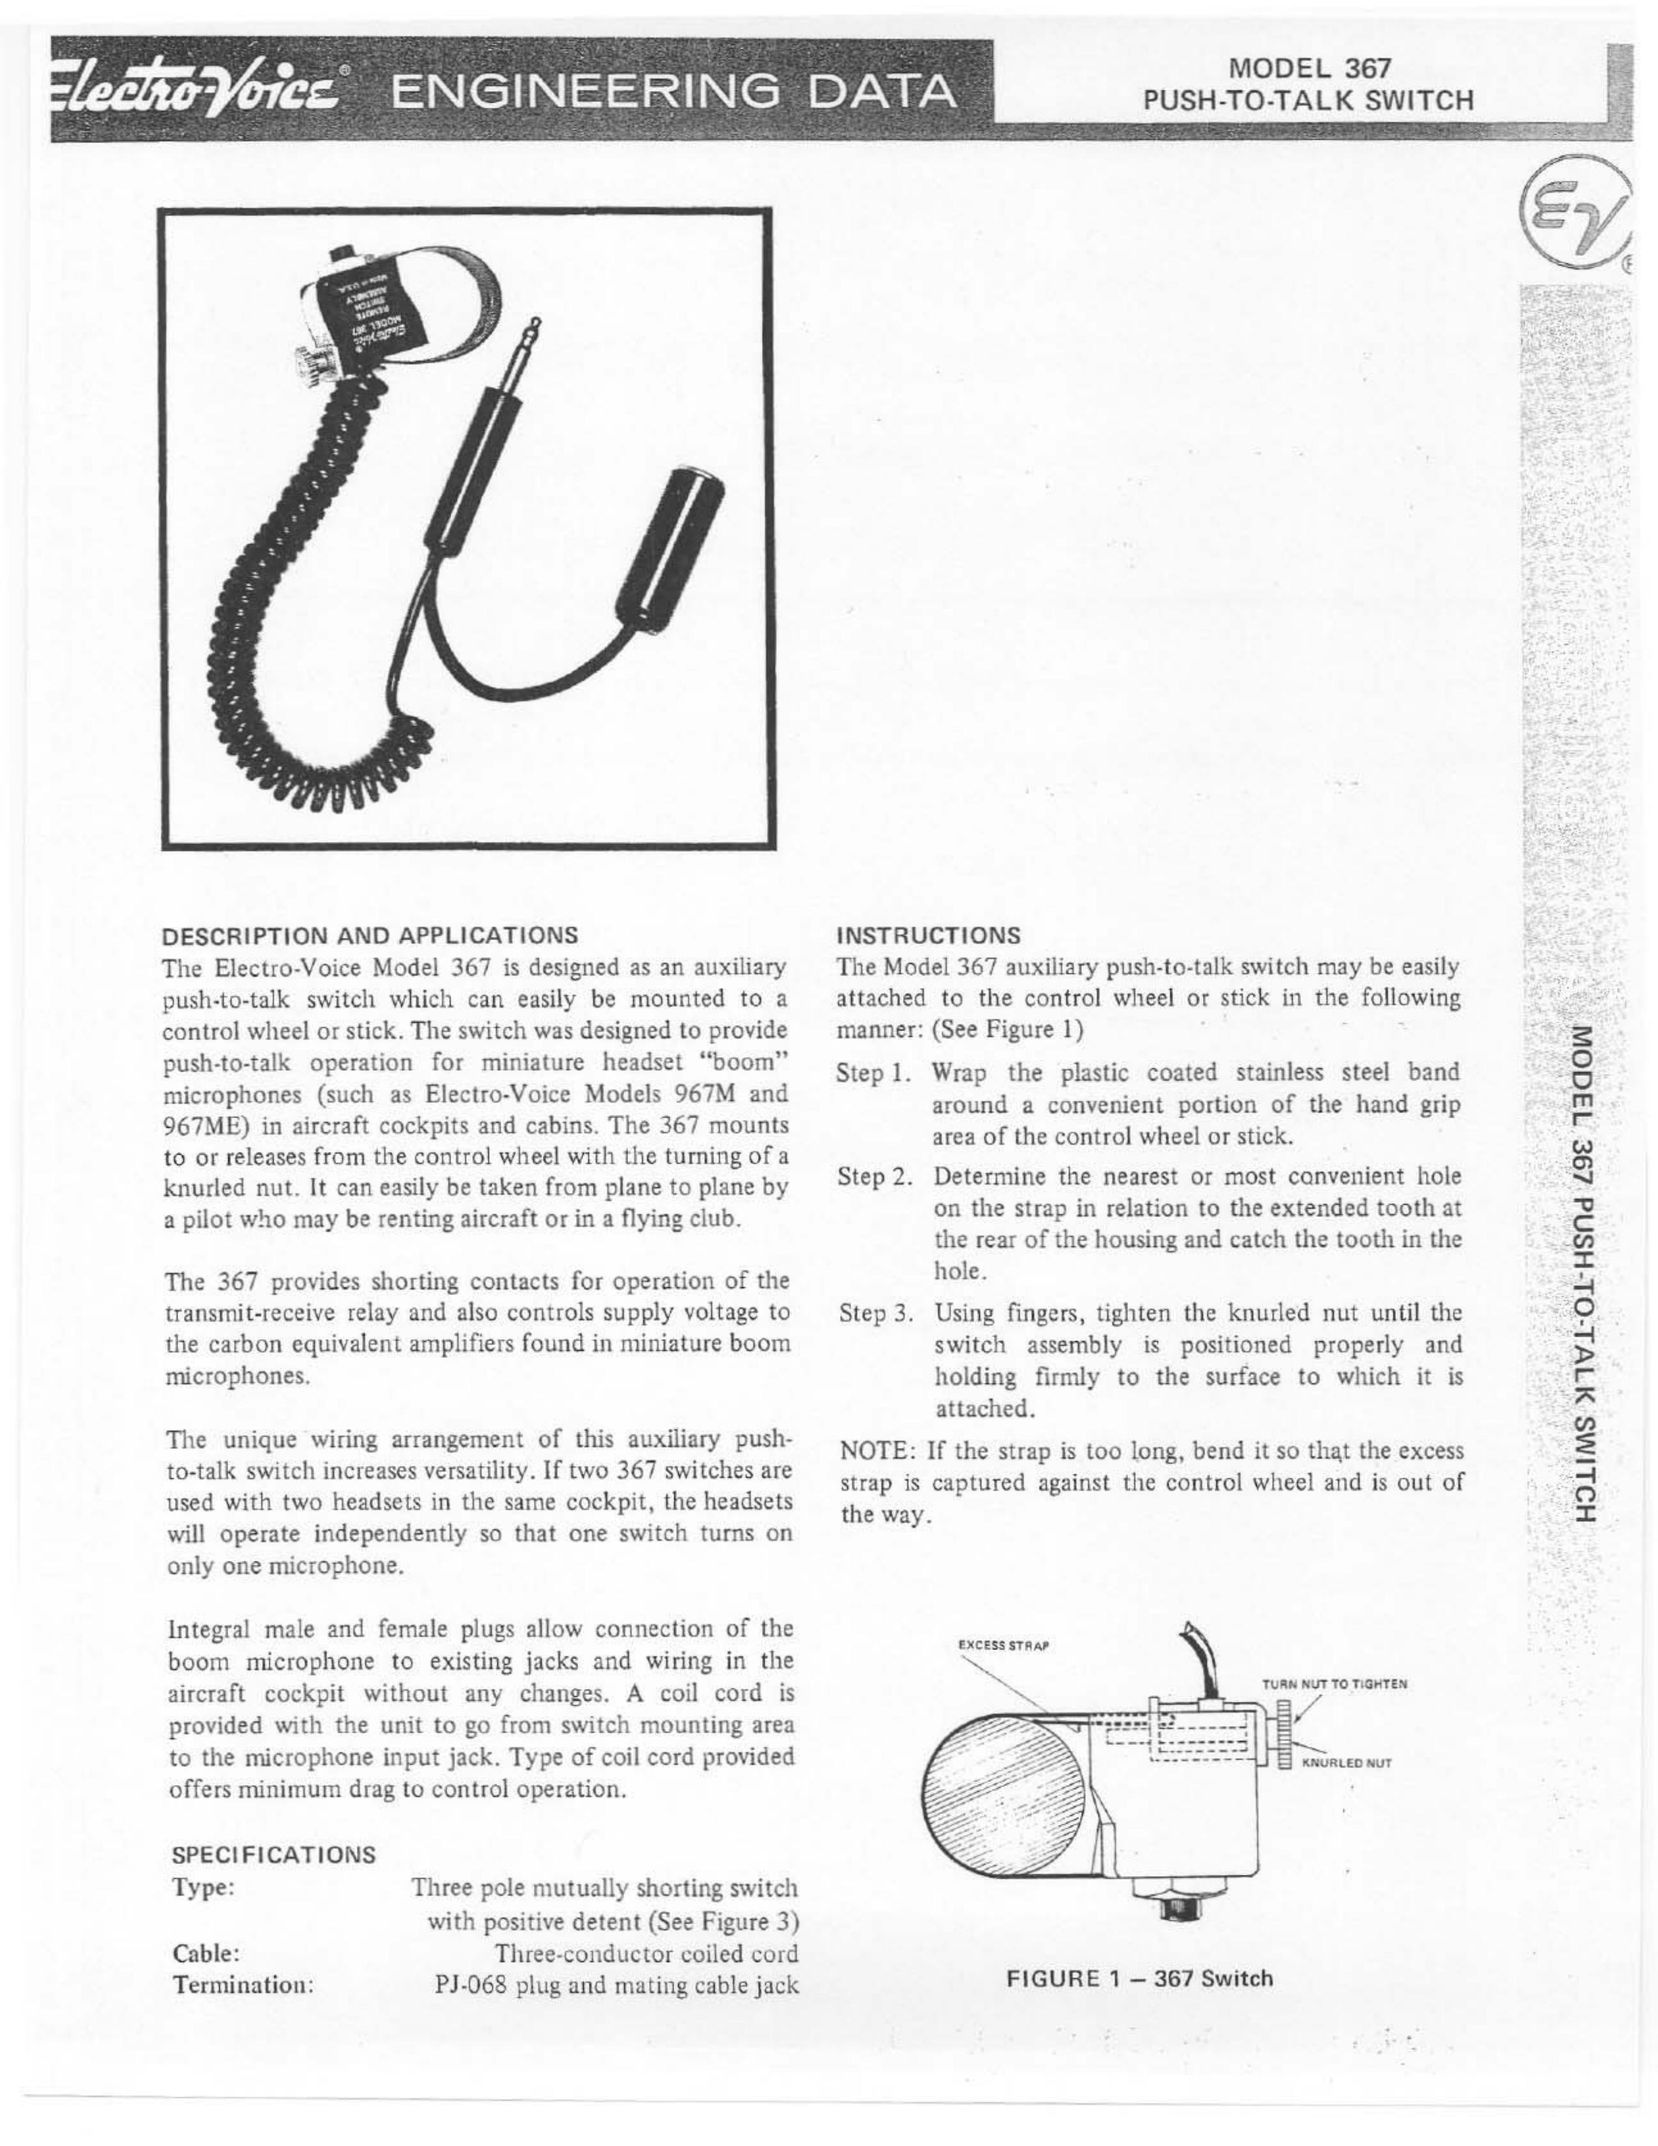 Electro-Voice 367 Switch User Manual